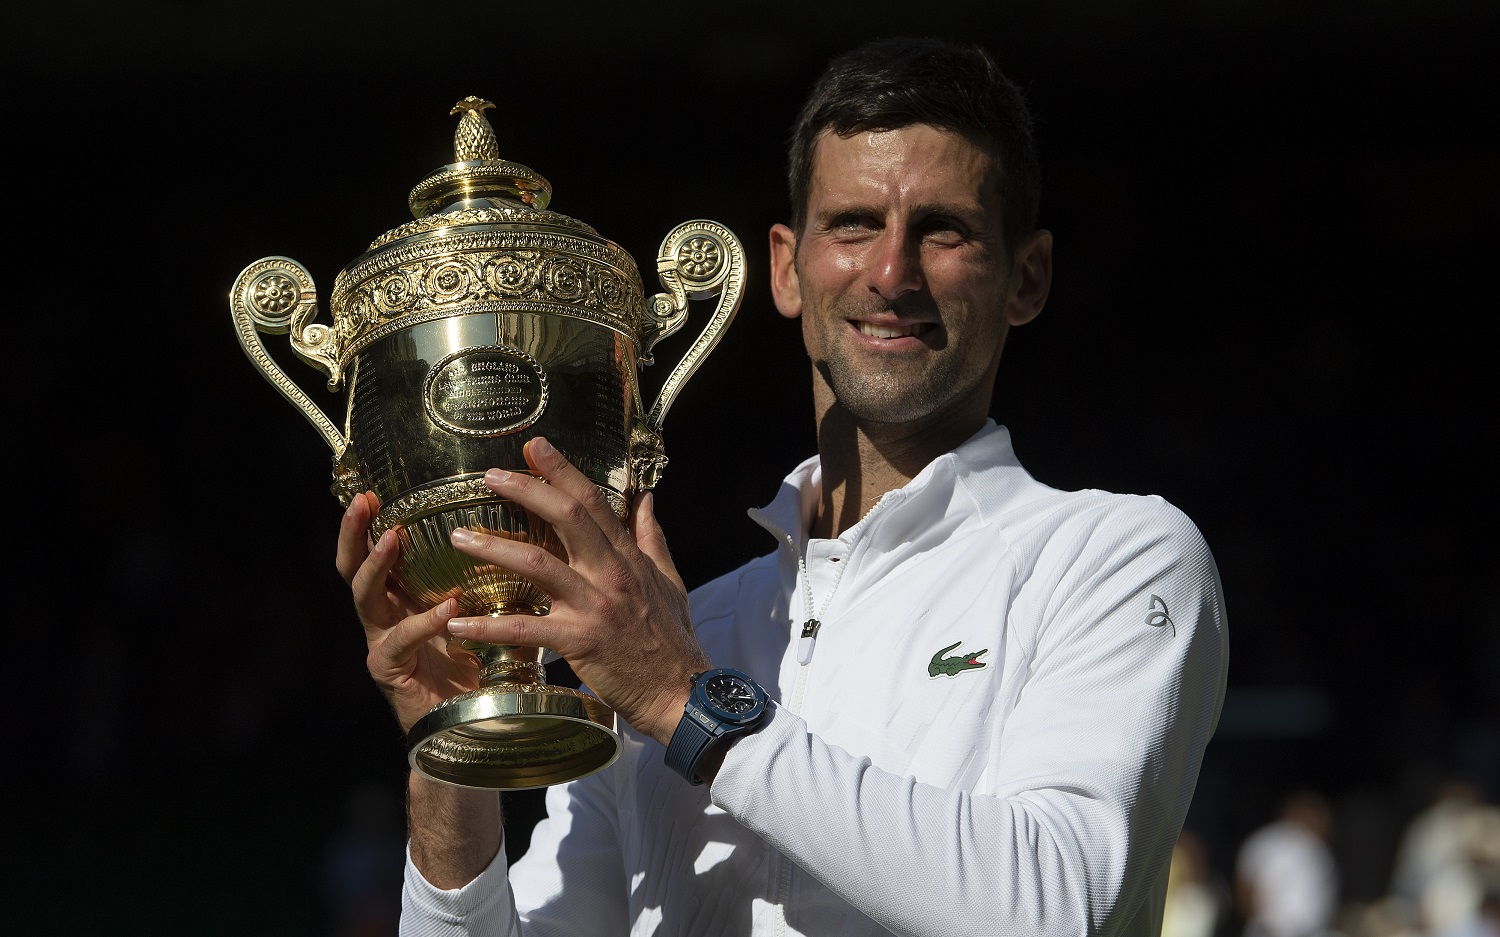 Novak Djokovic poses for photographs after his victory over Nick Kyrgios at All England Lawn Tennis and Croquet Club on July 10, 2022, in London. | Visionhaus/Getty Images